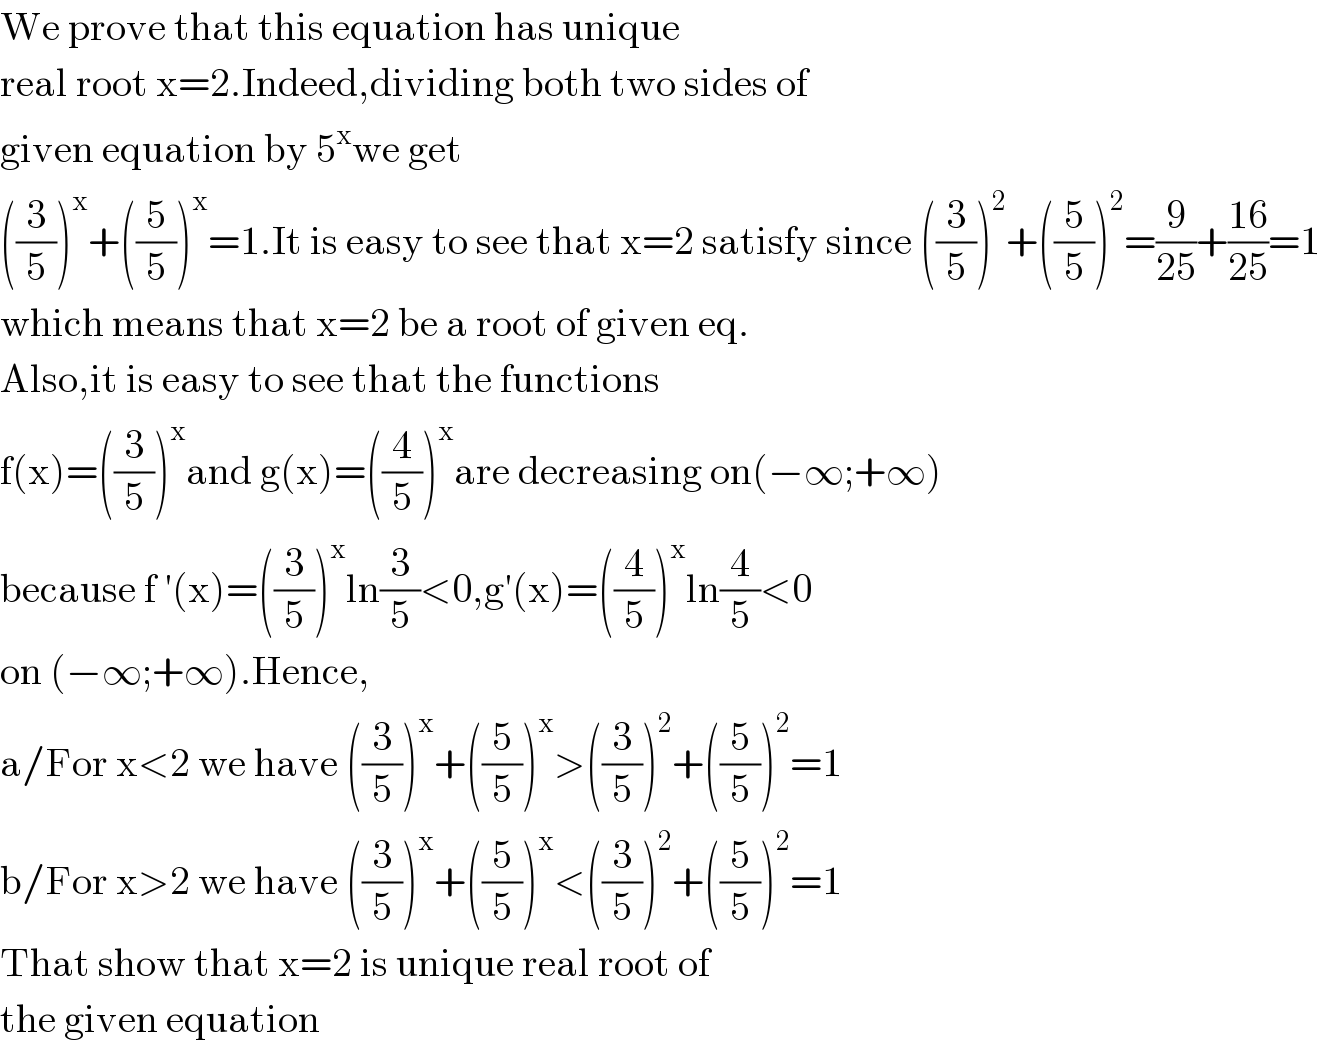 We prove that this equation has unique  real root x=2.Indeed,dividing both two sides of  given equation by 5^x we get  ((3/5))^x +((5/5))^x =1.It is easy to see that x=2 satisfy since ((3/5))^2 +((5/5))^2 =(9/(25))+((16)/(25))=1  which means that x=2 be a root of given eq.  Also,it is easy to see that the functions  f(x)=((3/5))^x and g(x)=((4/5))^x are decreasing on(−∞;+∞)  because f ′(x)=((3/5))^x ln(3/5)<0,g′(x)=((4/5))^x ln(4/5)<0  on (−∞;+∞).Hence,  a/For x<2 we have ((3/5))^x +((5/5))^x >((3/5))^2 +((5/5))^2 =1  b/For x>2 we have ((3/5))^x +((5/5))^x <((3/5))^2 +((5/5))^2 =1  That show that x=2 is unique real root of  the given equation  